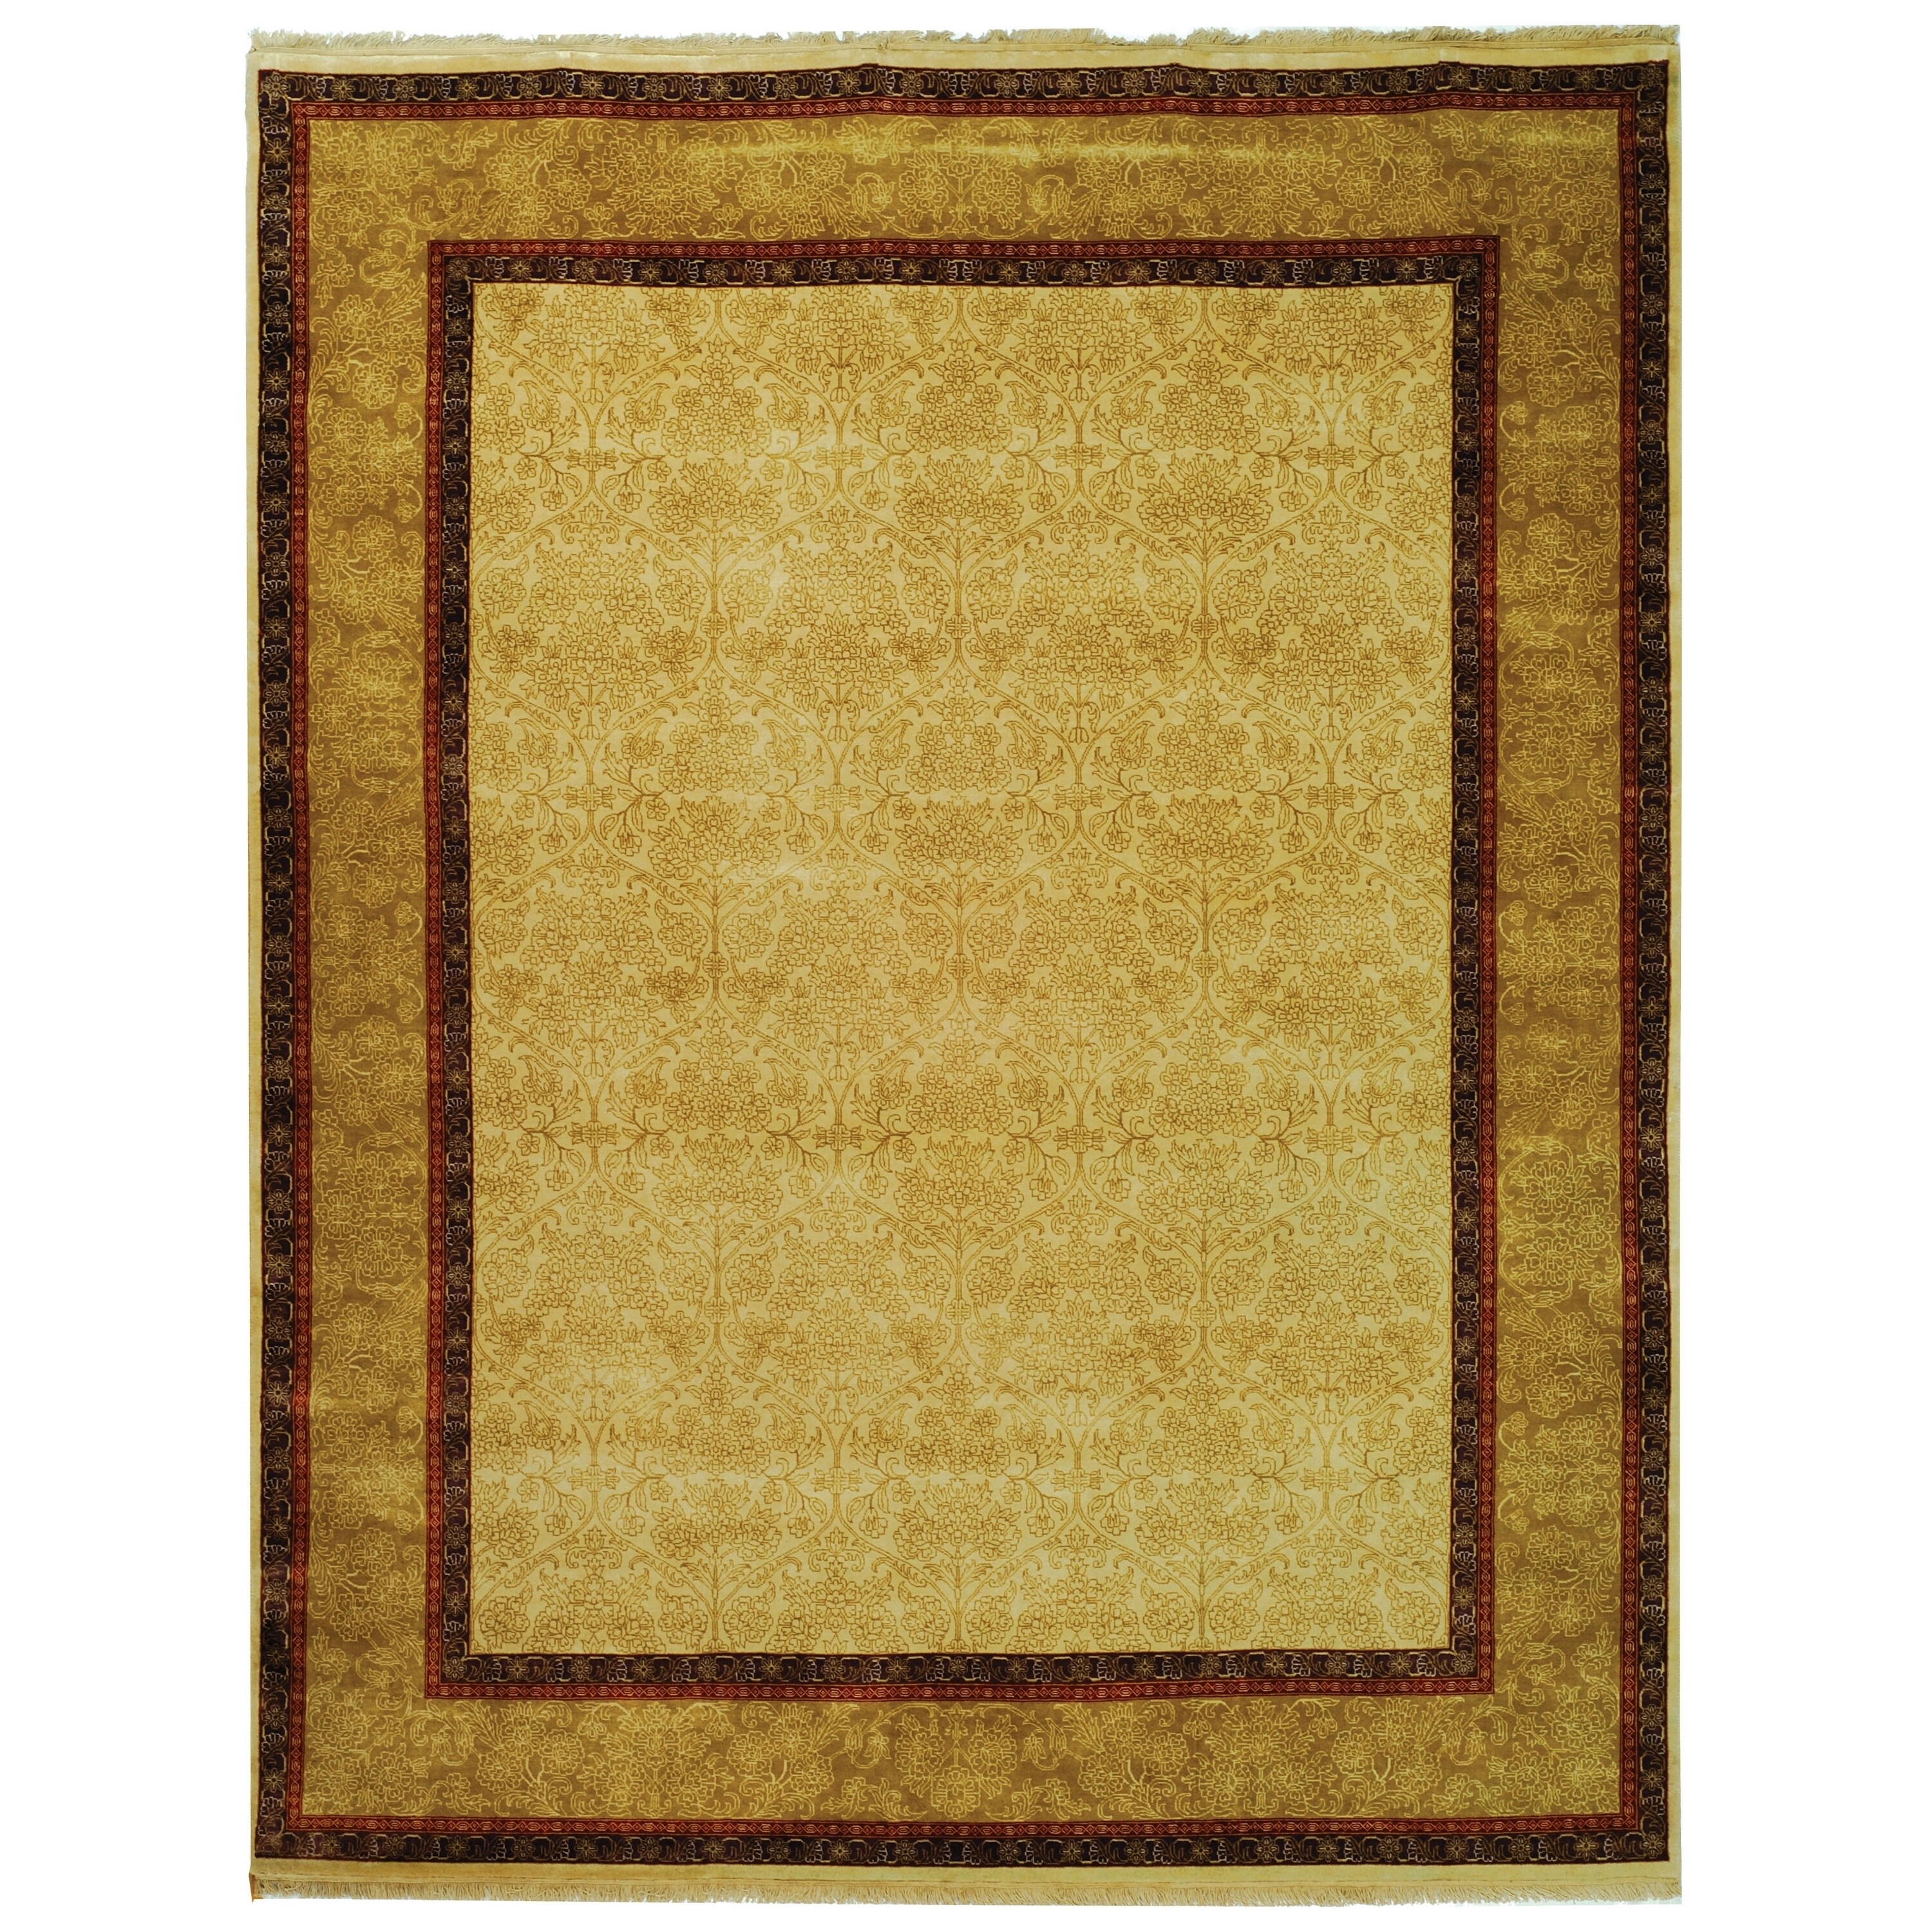 Safavieh Hand knotted Ganges River Ivory/ Gold Wool Rug (8 X 10)